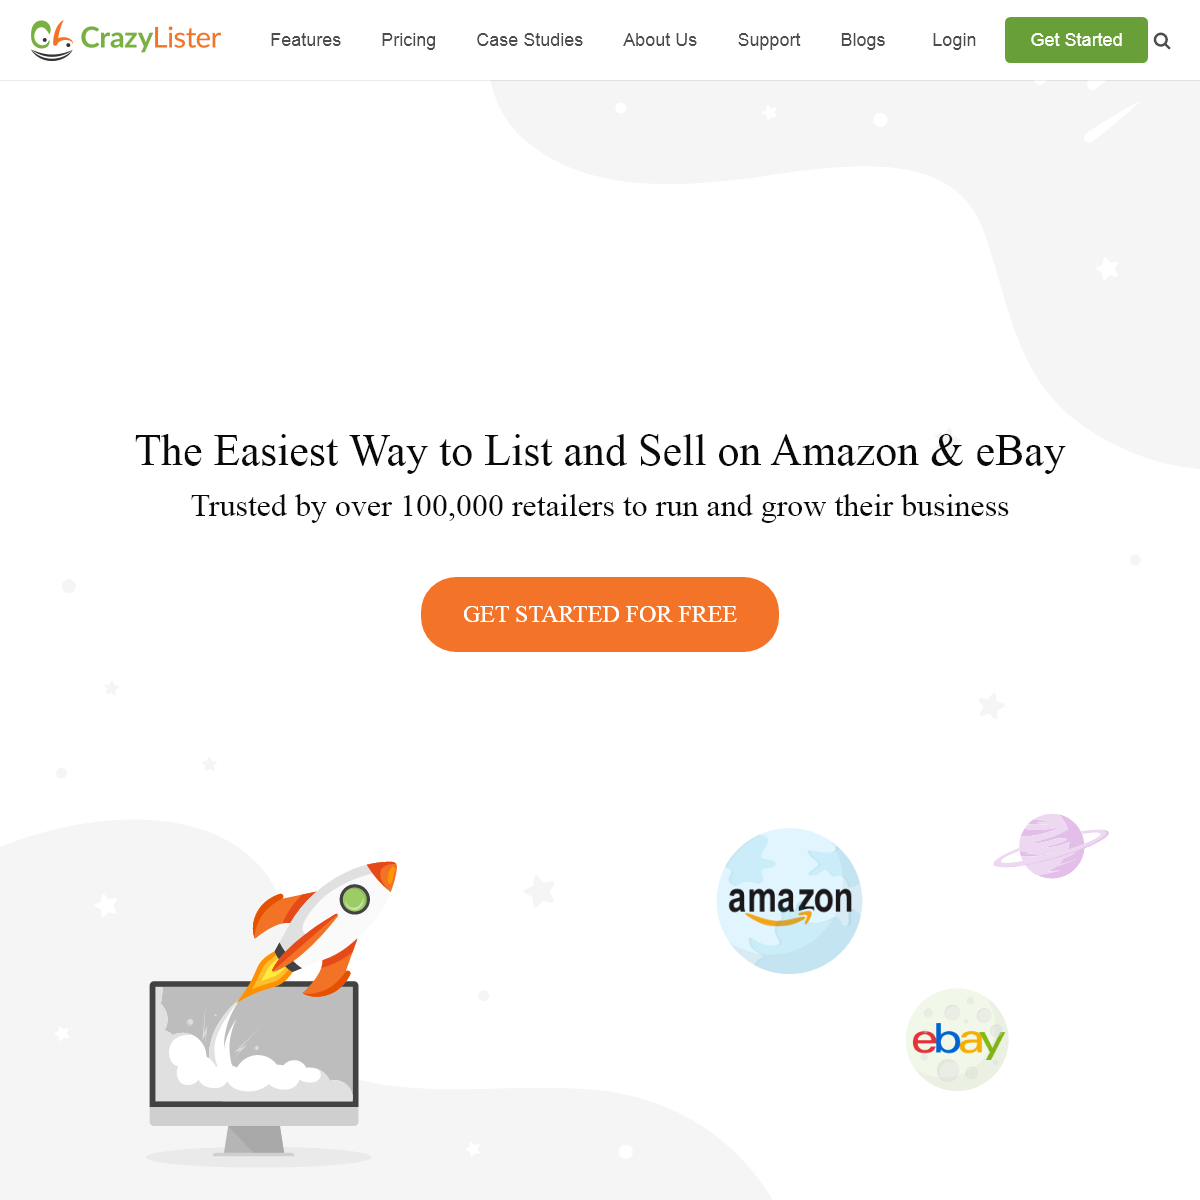 CrazyLister- The Easiest Way to List and Sell on Amazon & eBay